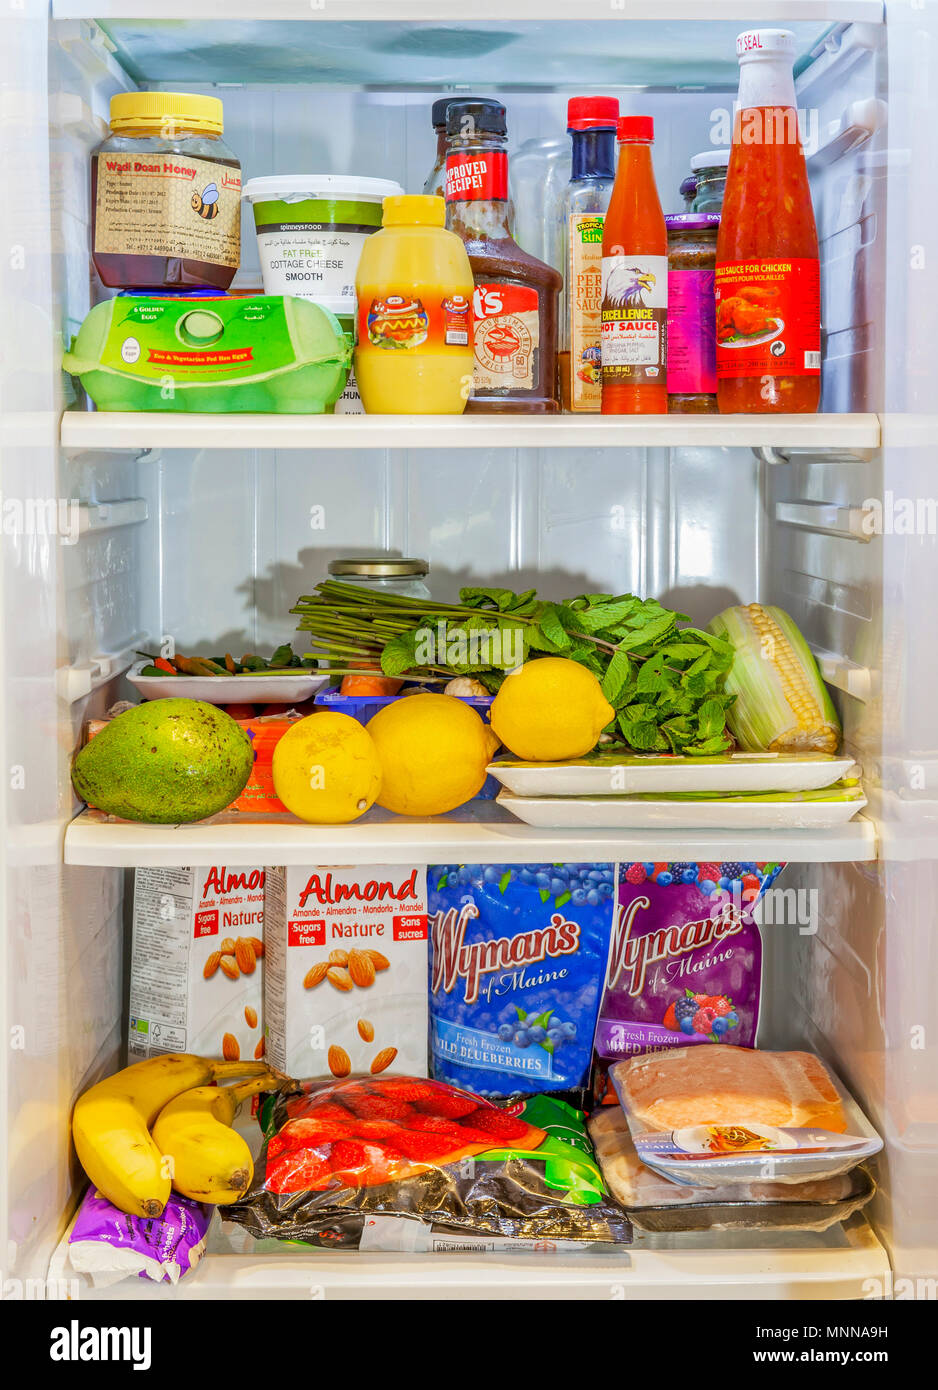 Refrigerator with food Stock Photo